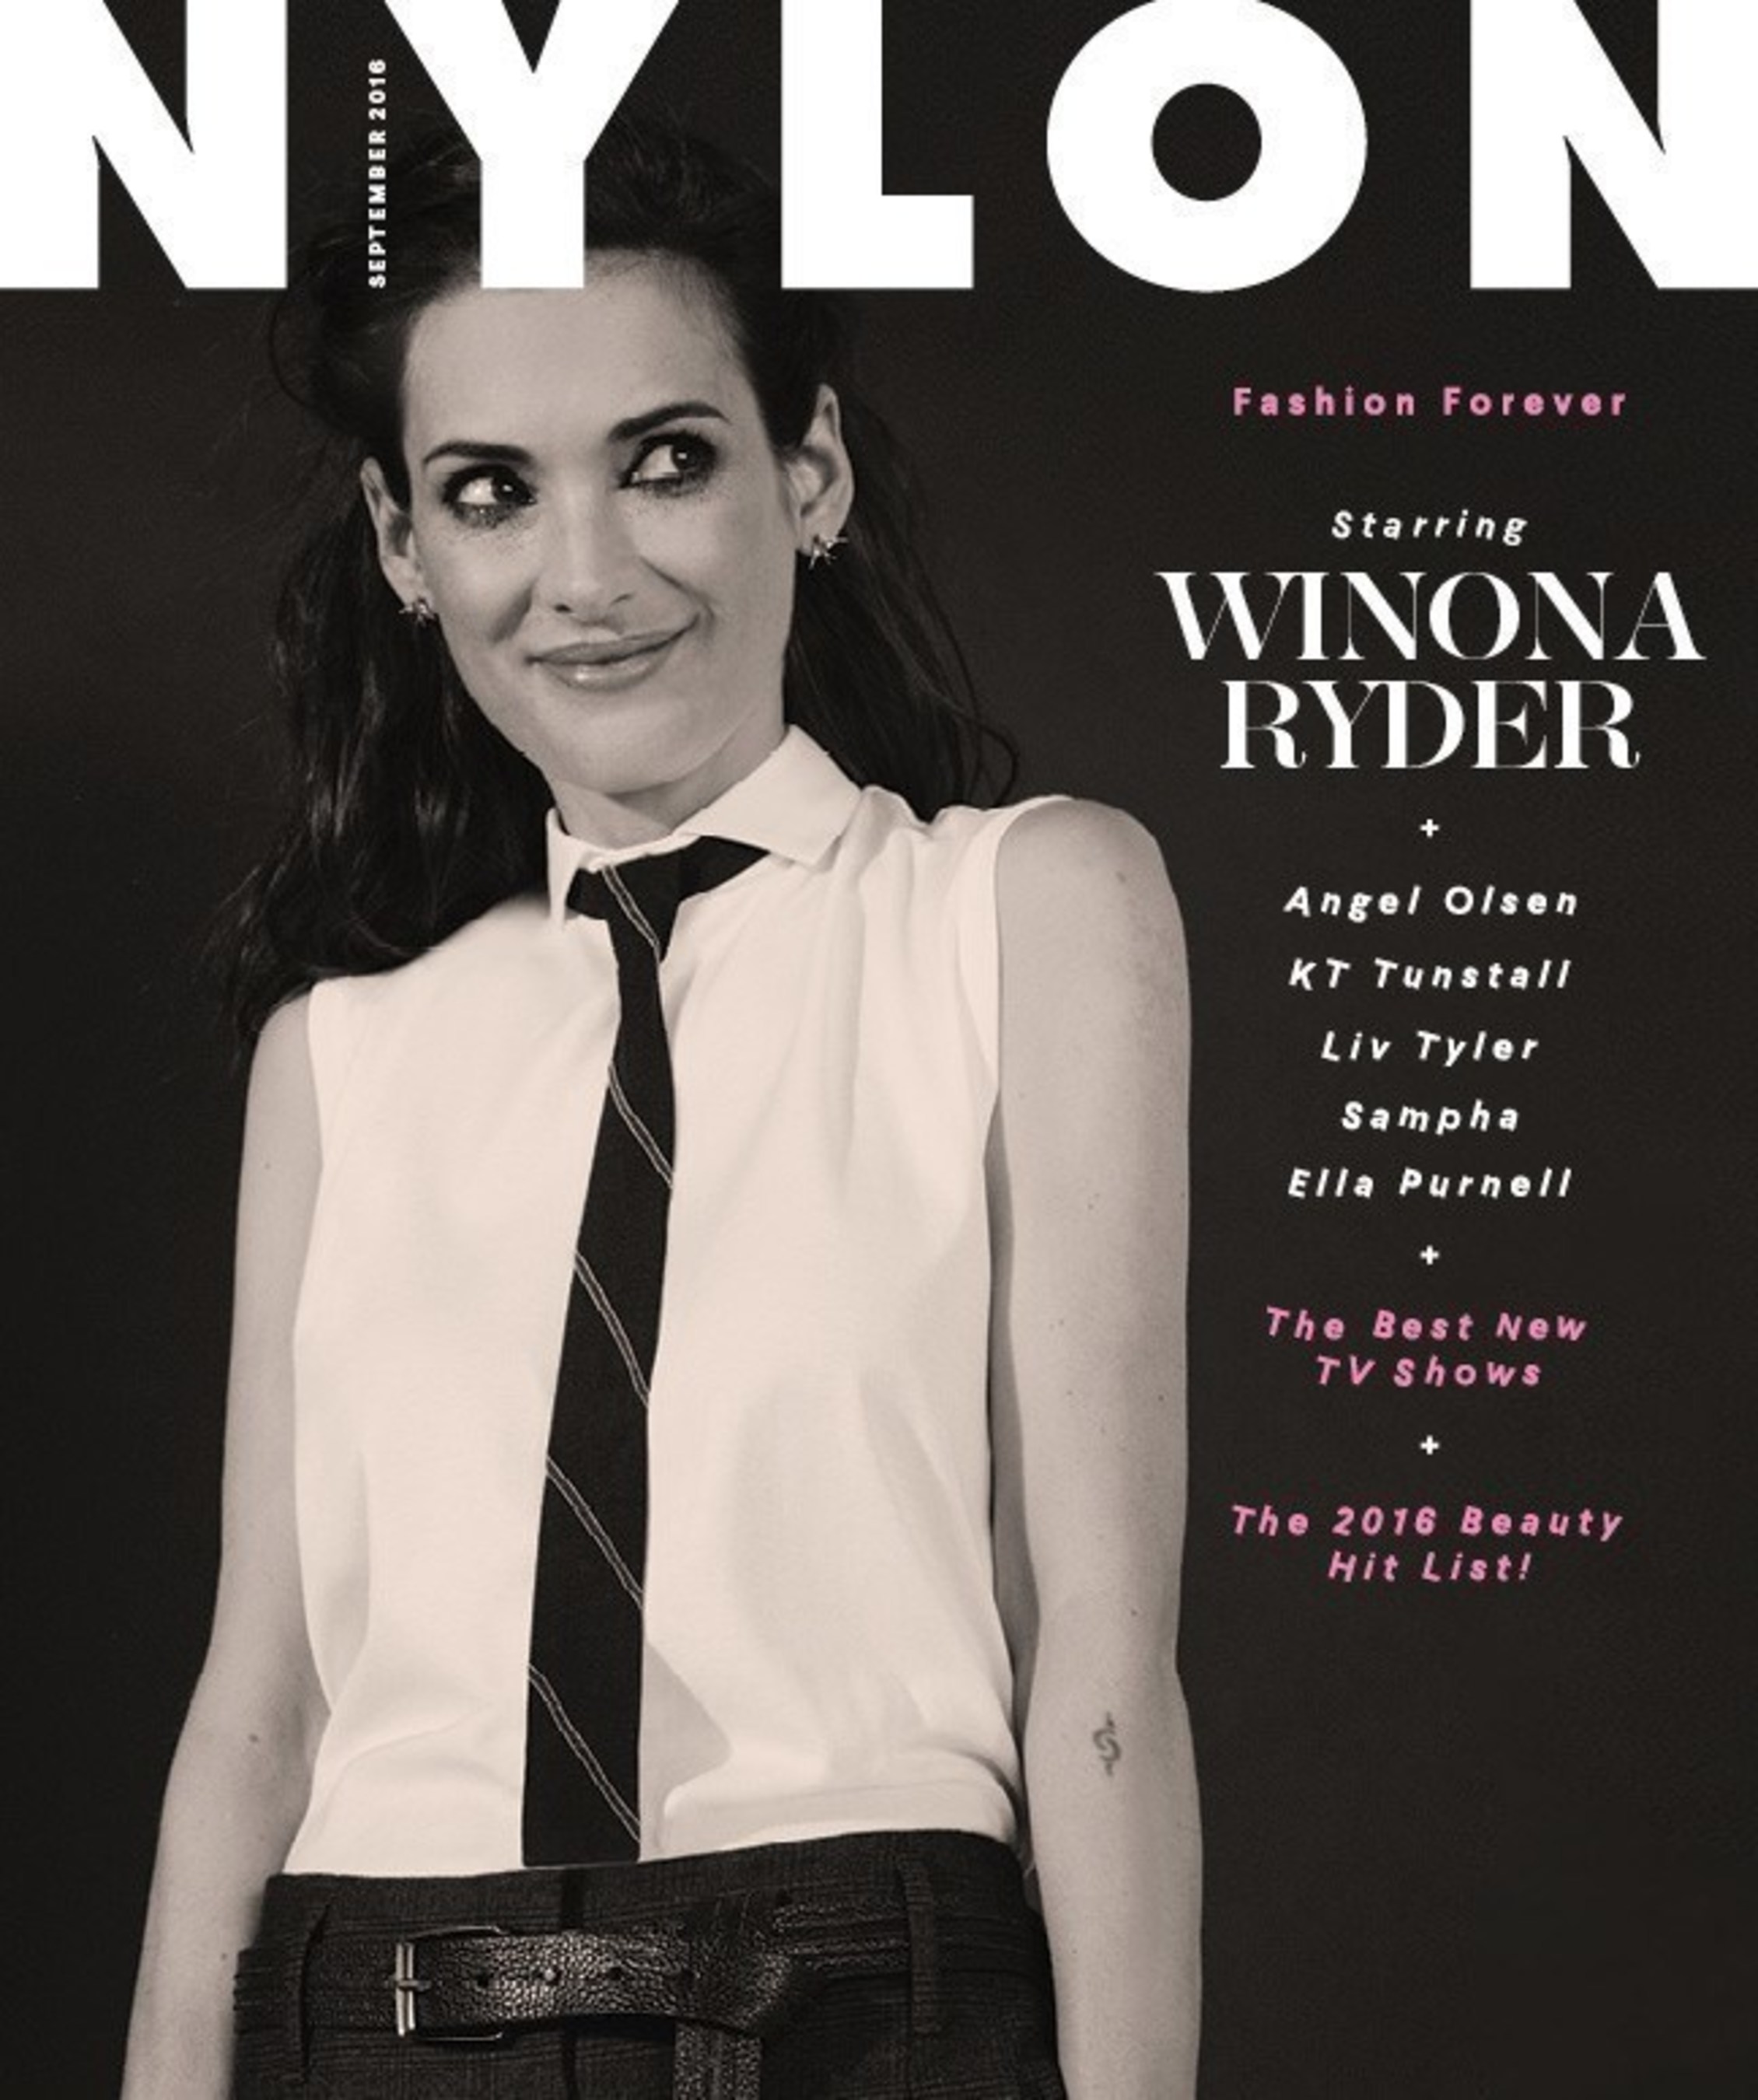 Winona Ryder Steps Out for NYLON's Biggest Issue of the Year. credit: NYLON/Jesse John Jenkins